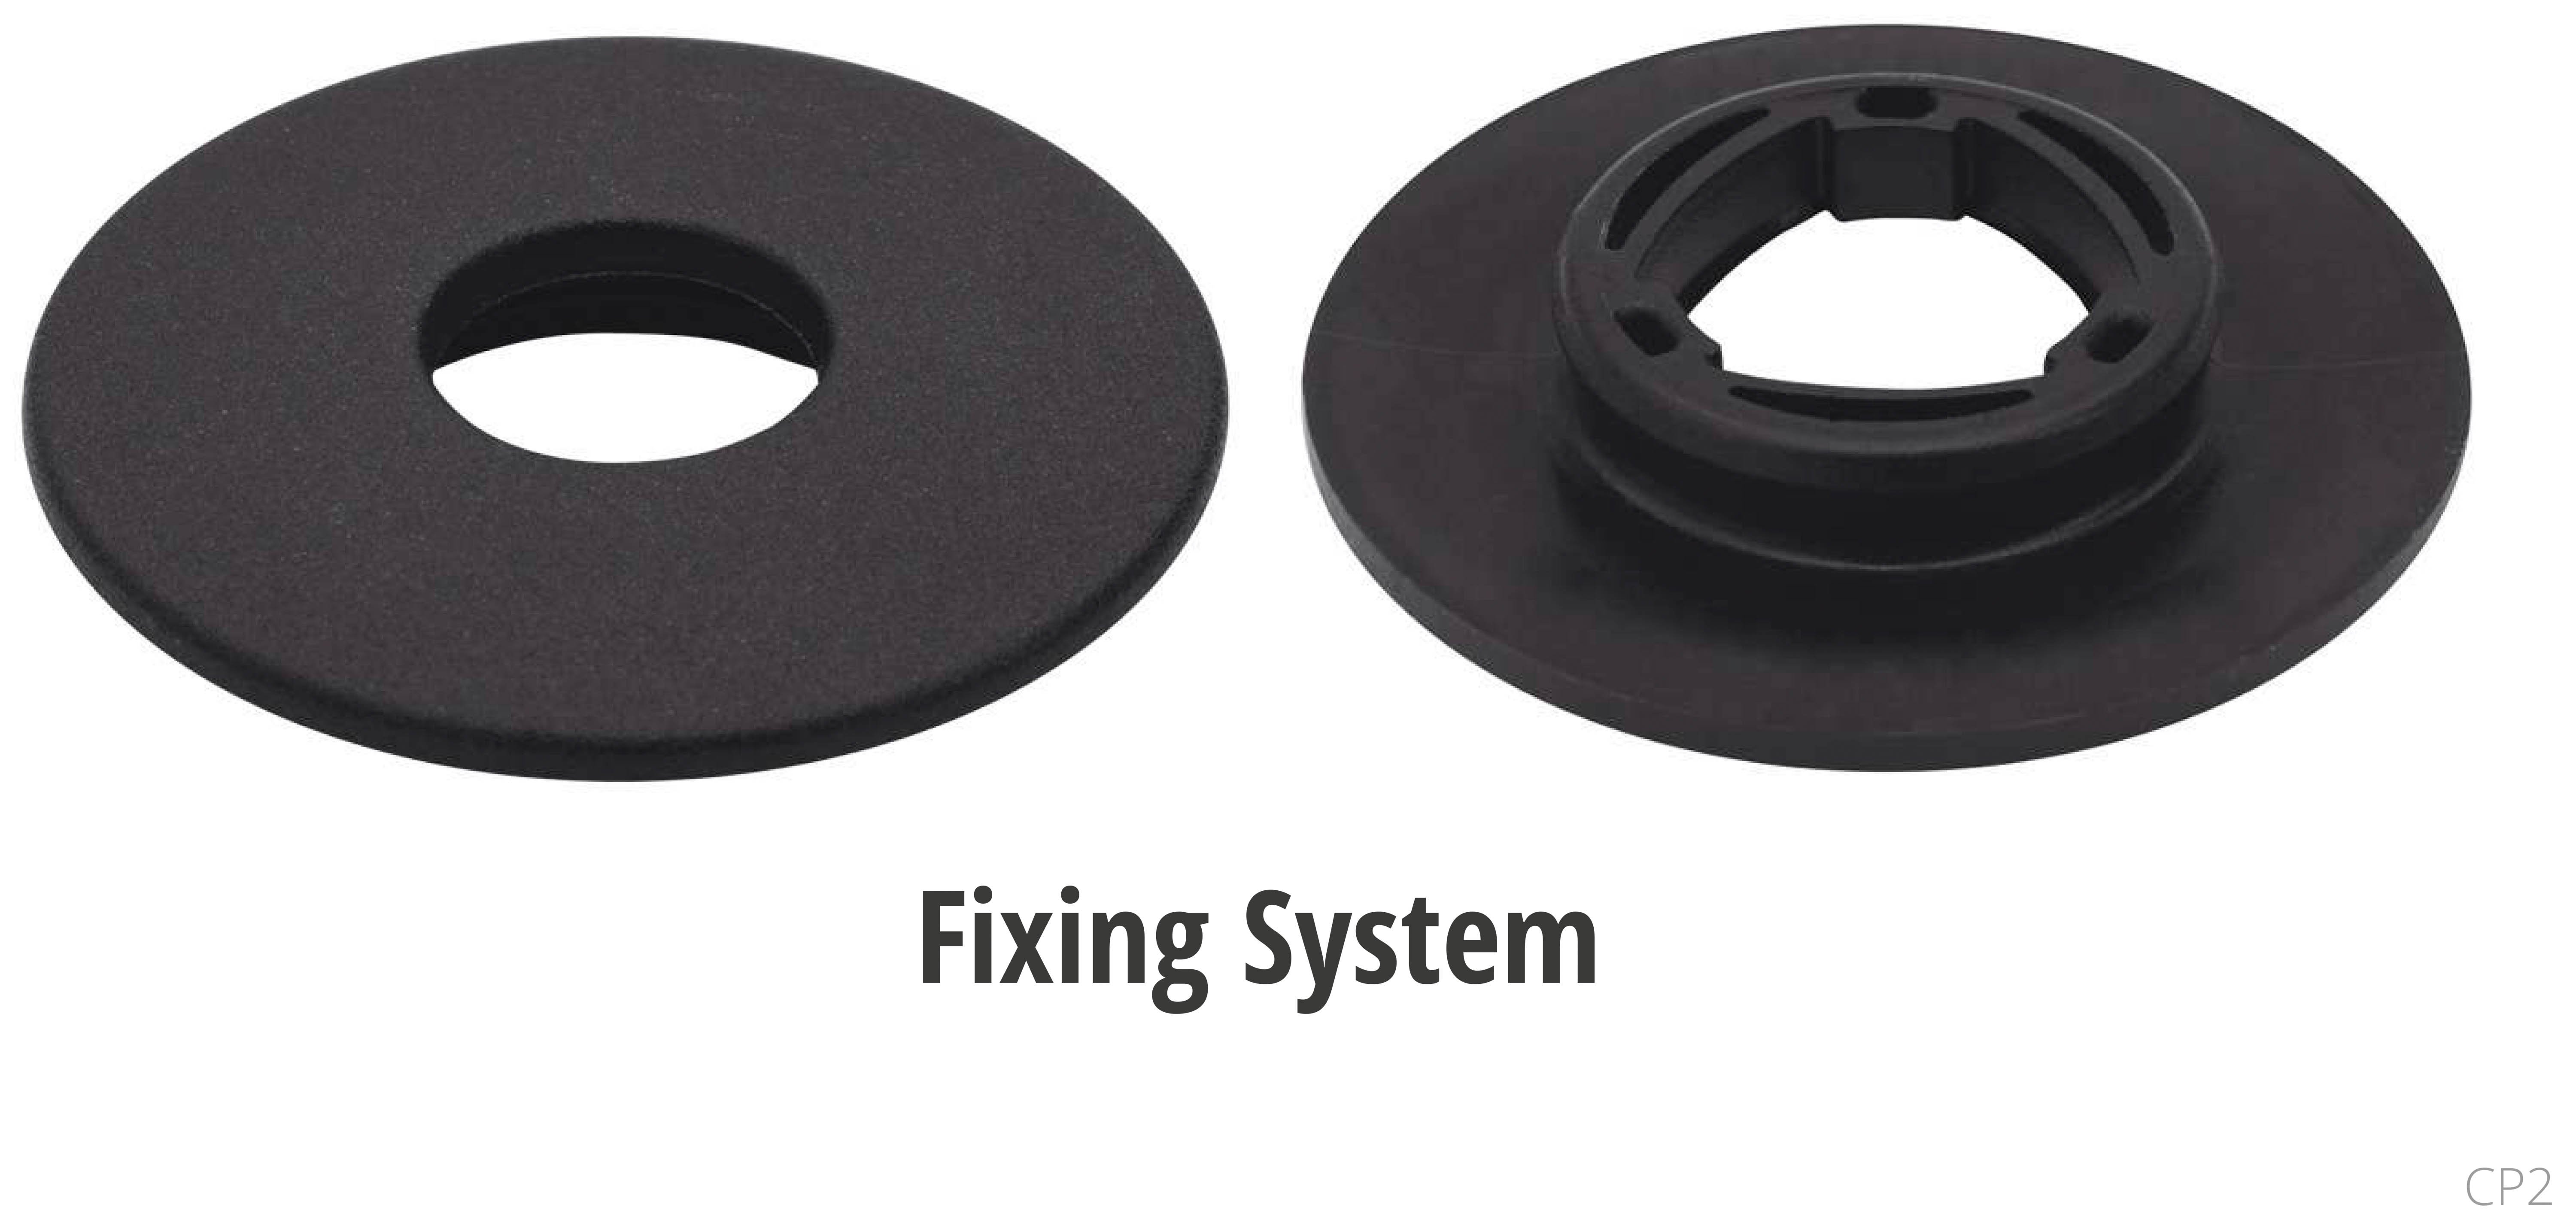 Rubber mats RubberLine for Nissan Juke (F16) 08/2019-Today